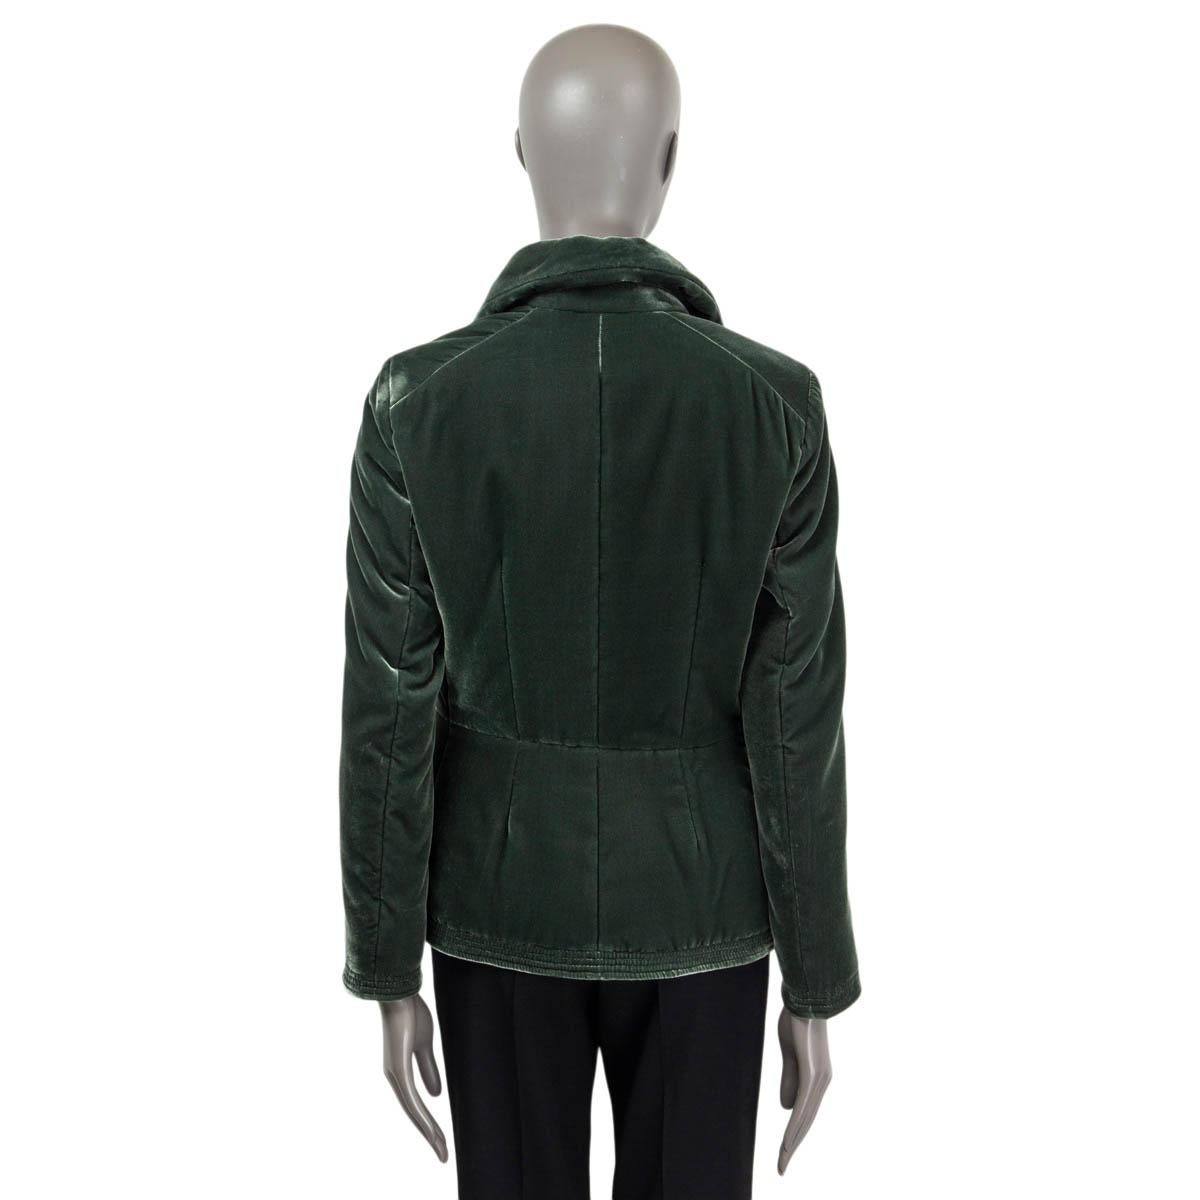 GIORGIO ARMANI dark green QUILTED VELVET Jacket 42 M + SCARF In Excellent Condition For Sale In Zürich, CH